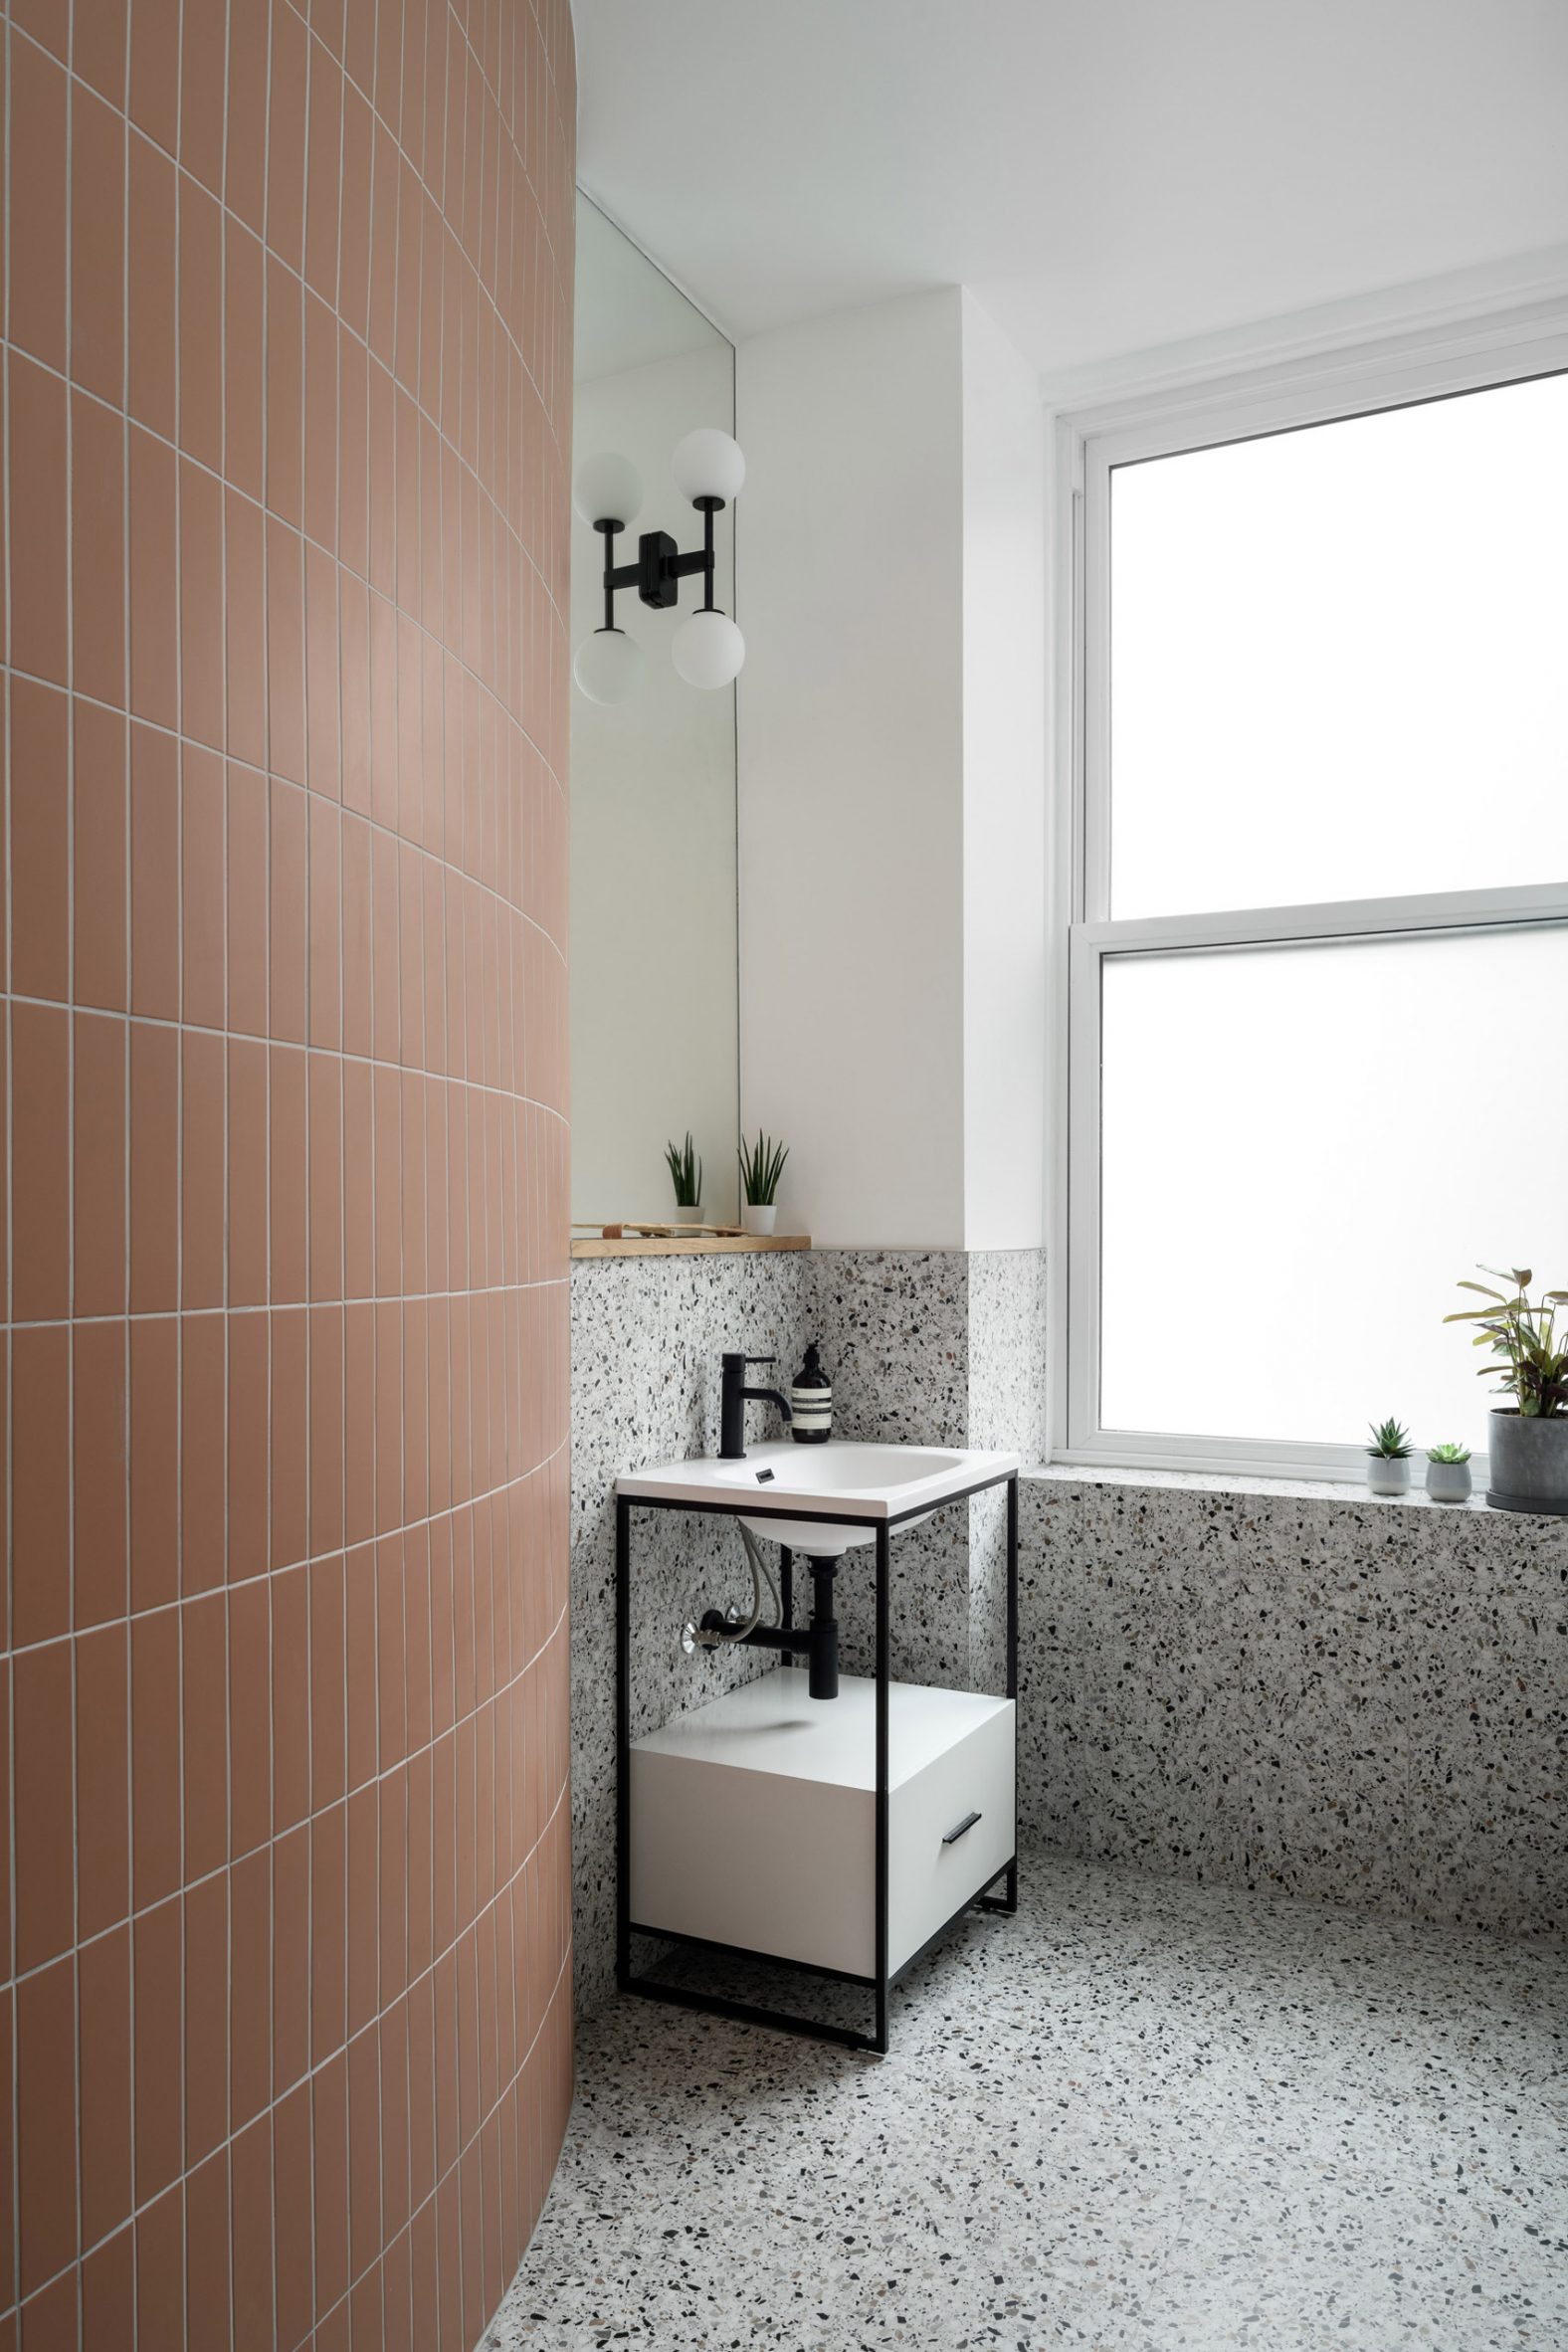 Freestanding sink with integrated cabinet in terracotta and terrazzo panelled bathroom designed by Luke McClelland